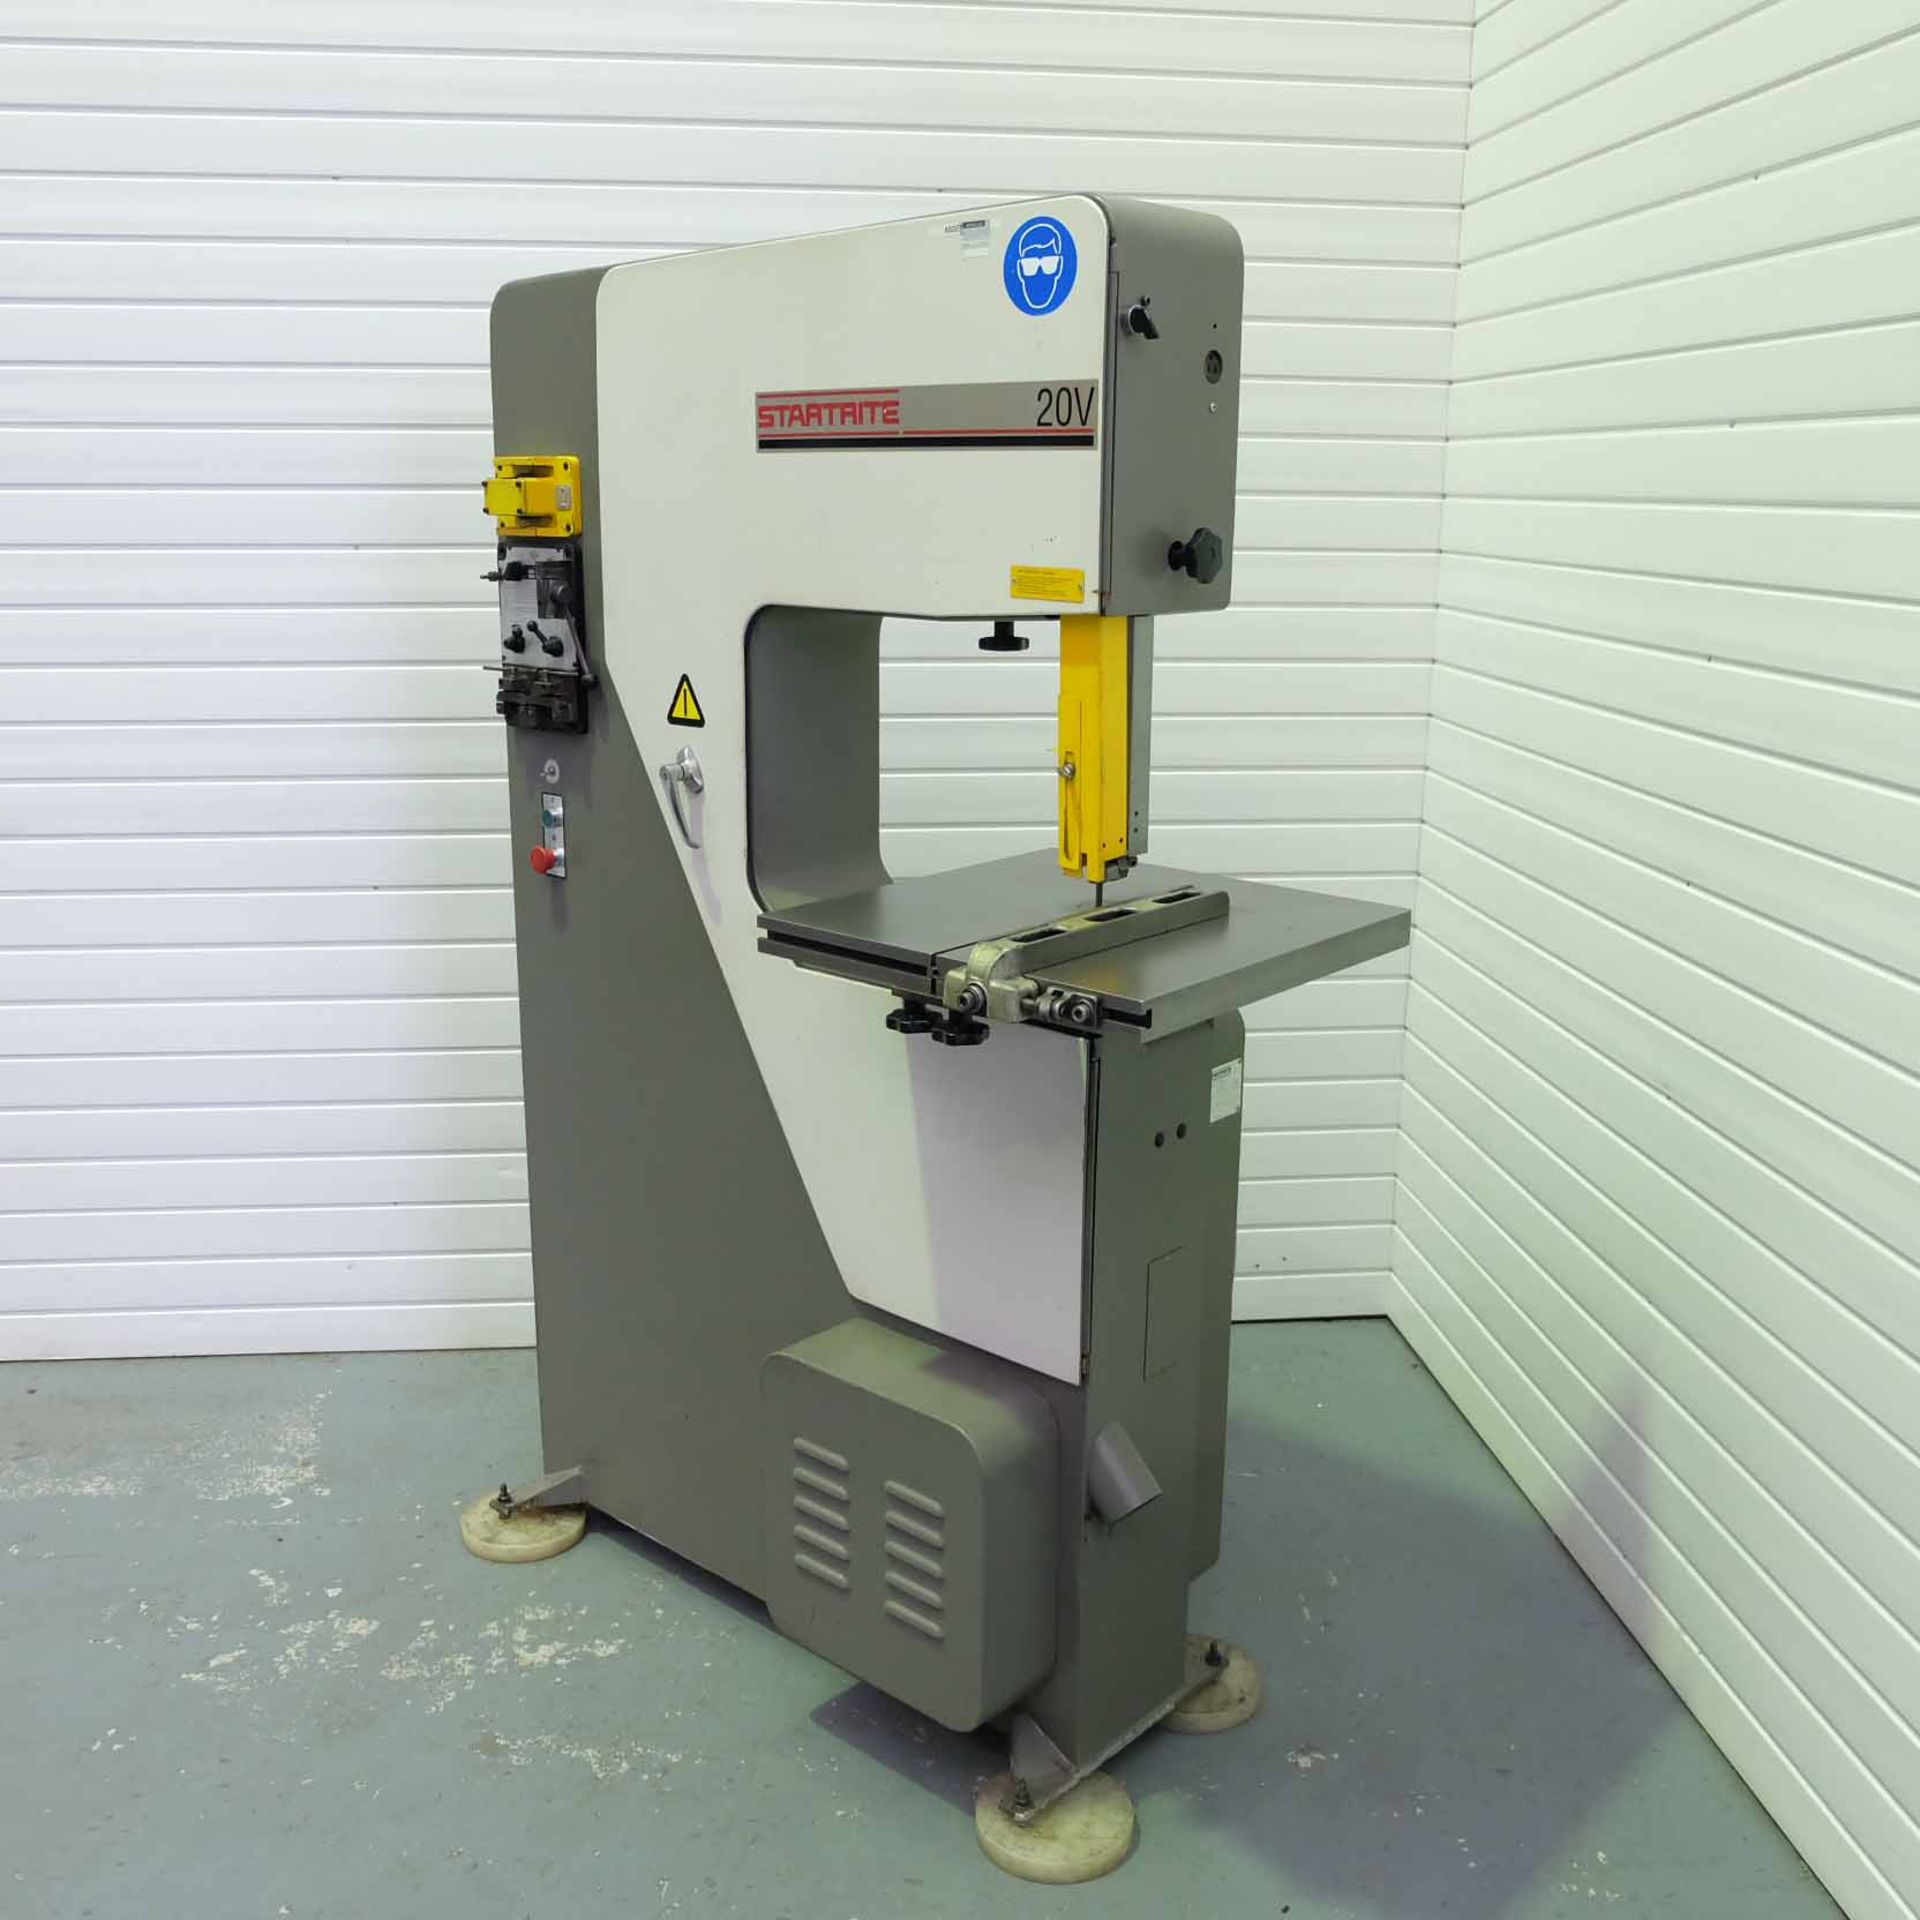 Startrite 20V / UK3 10 Speed Vertical Bandsaw. Throat 20". Daylight 12". Table Size 20 1/2" x 20 1/2 - Image 2 of 10